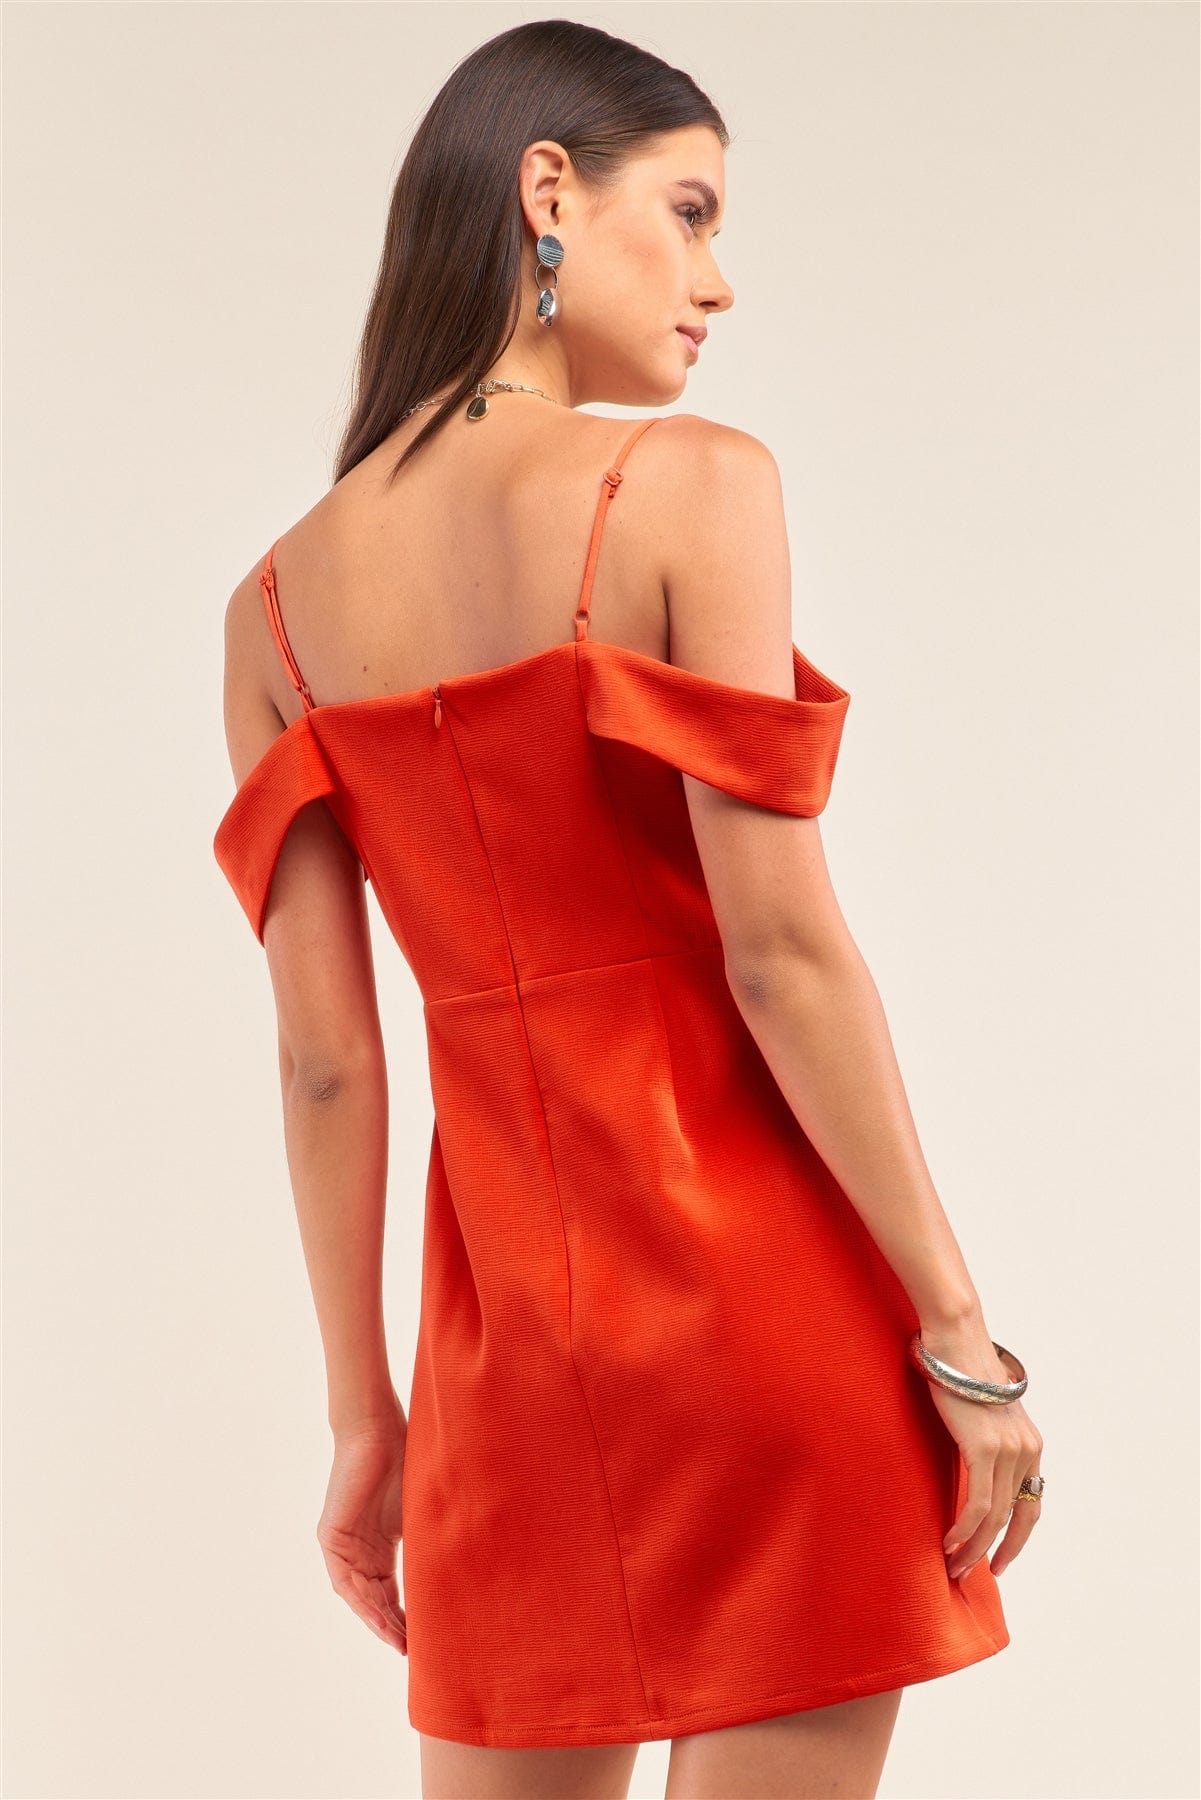 Tomato Red Sweetheart Neck Off The Shoulder Mini Dress - Fashion Quality Boutik